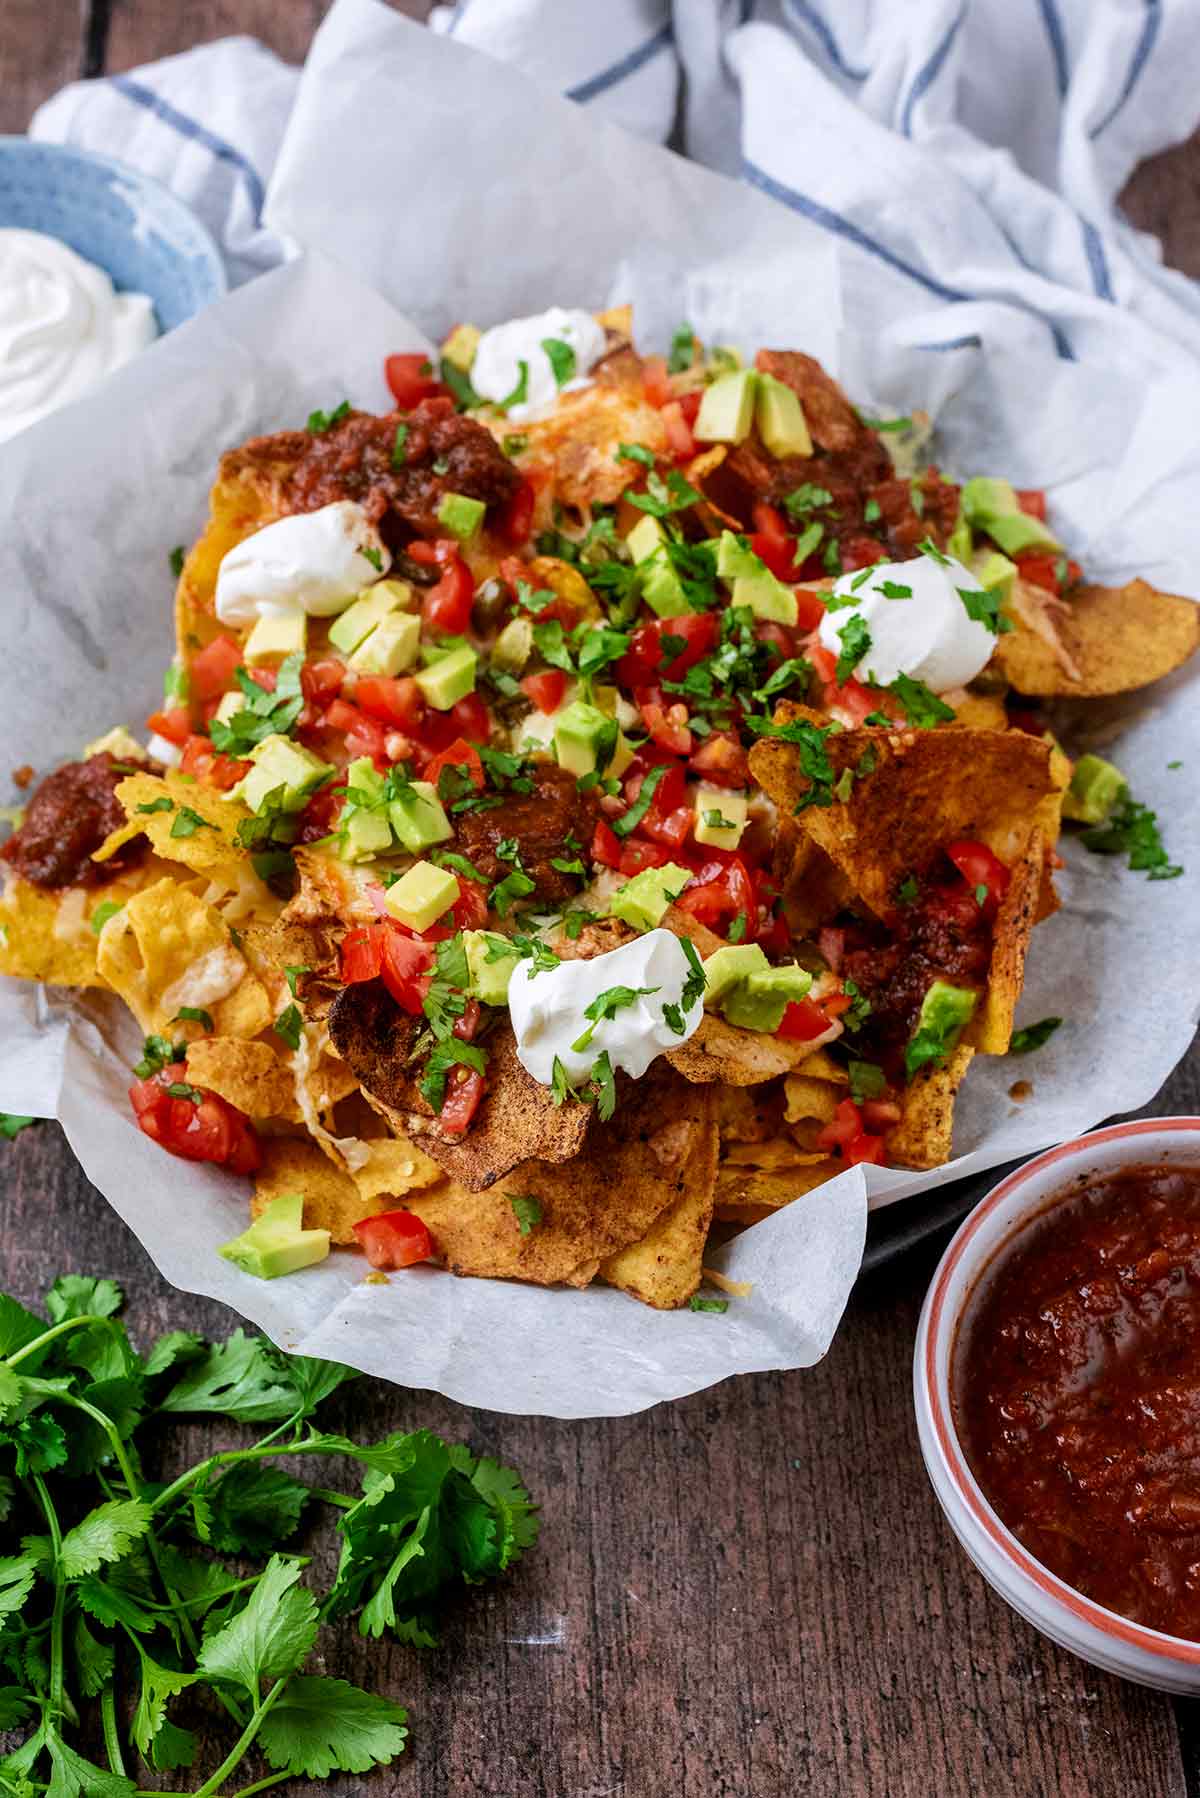 A plate of nachos in front of a striped towel.